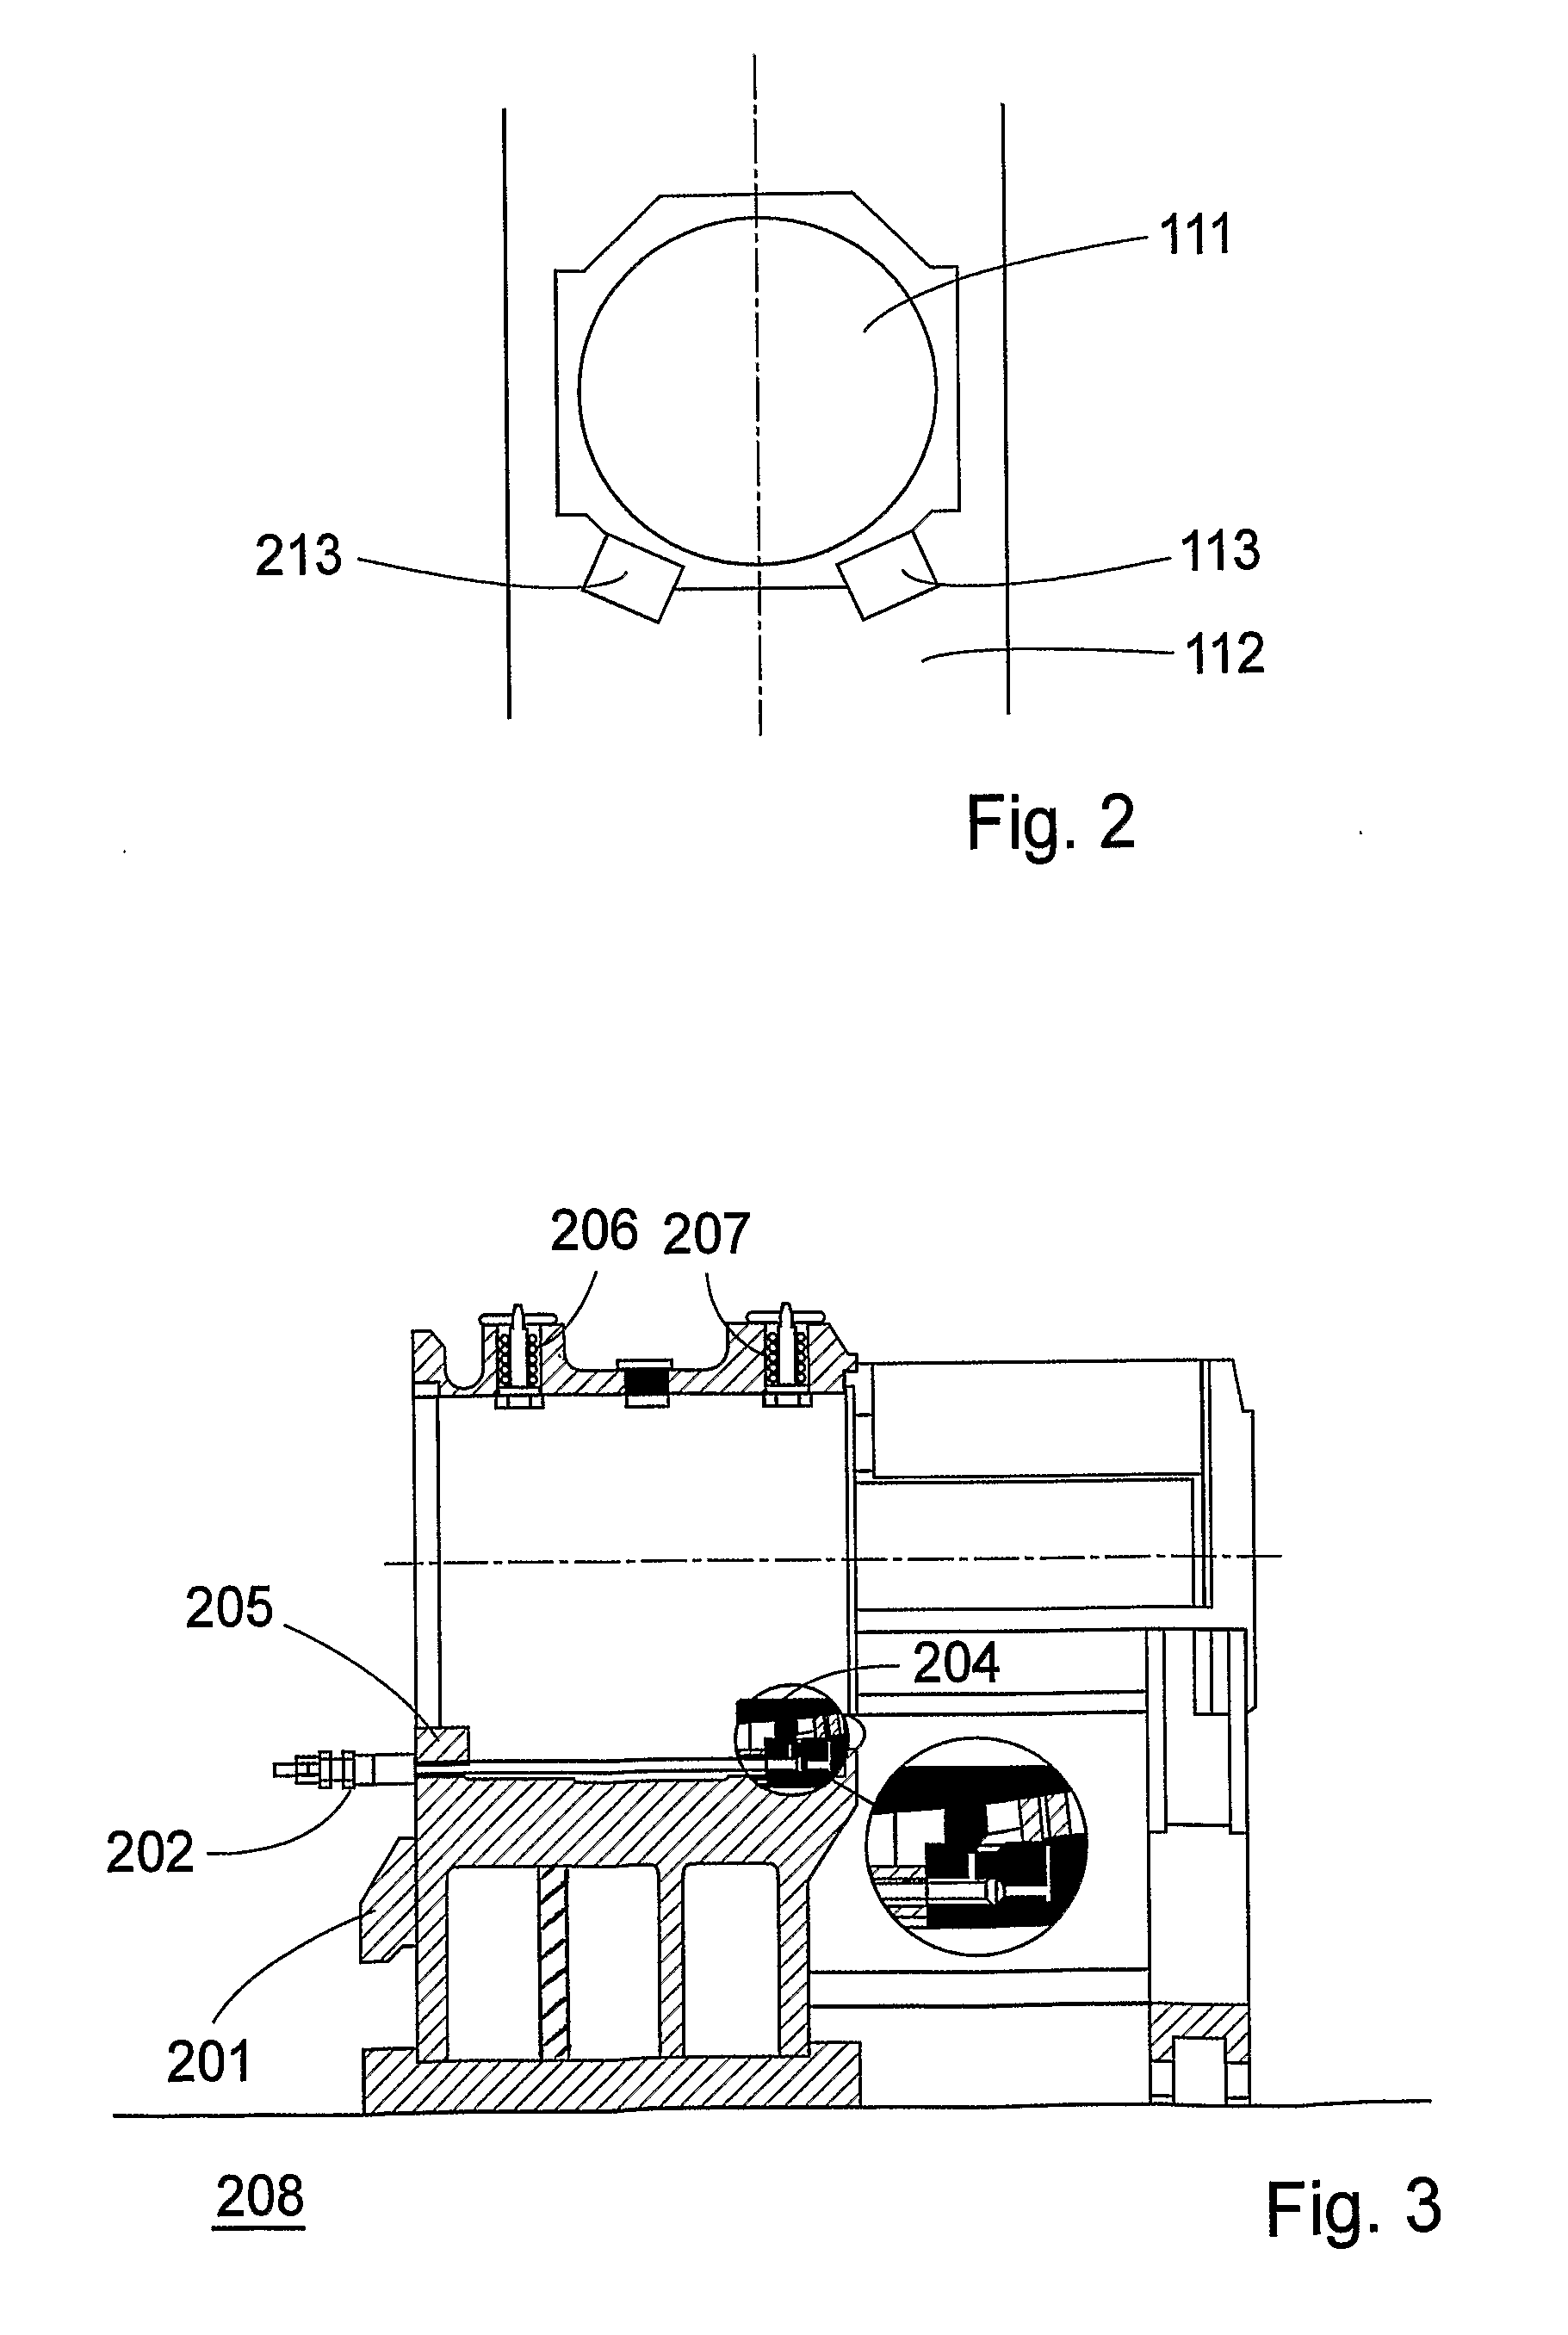 Device for Aligning the Refining Disc of a Refining Apparatus